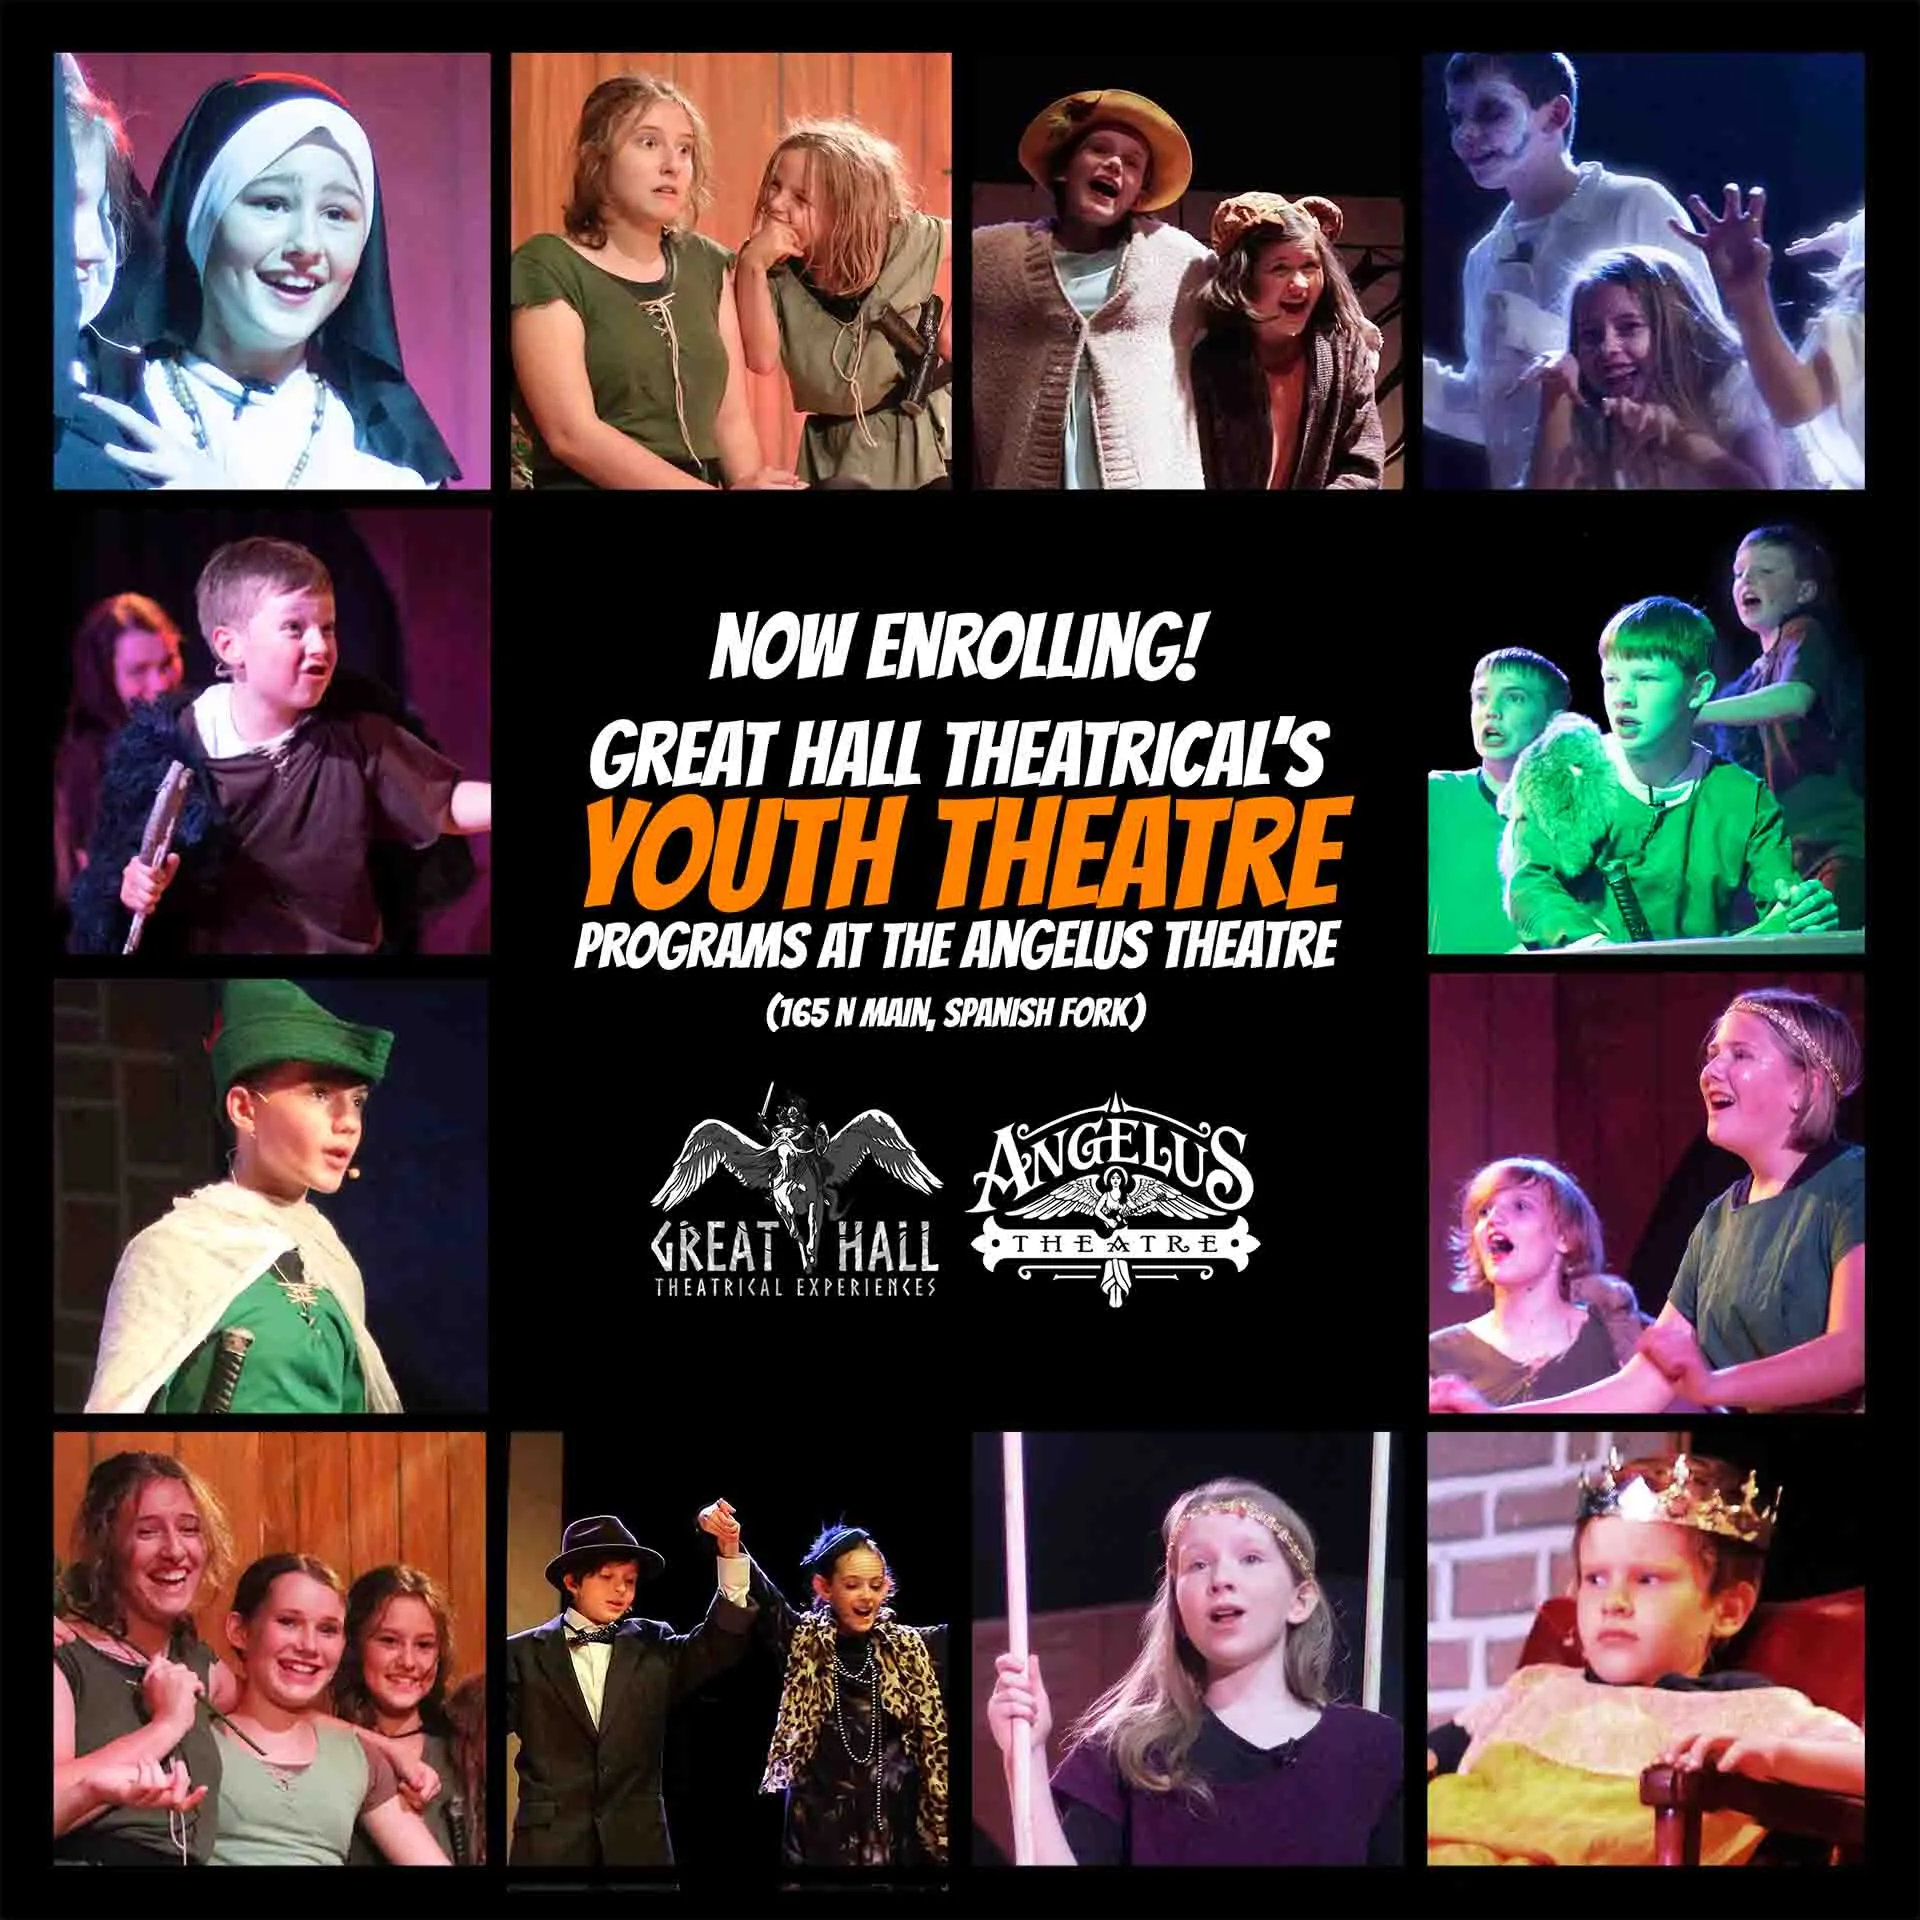 Great Hall Youth Theatre